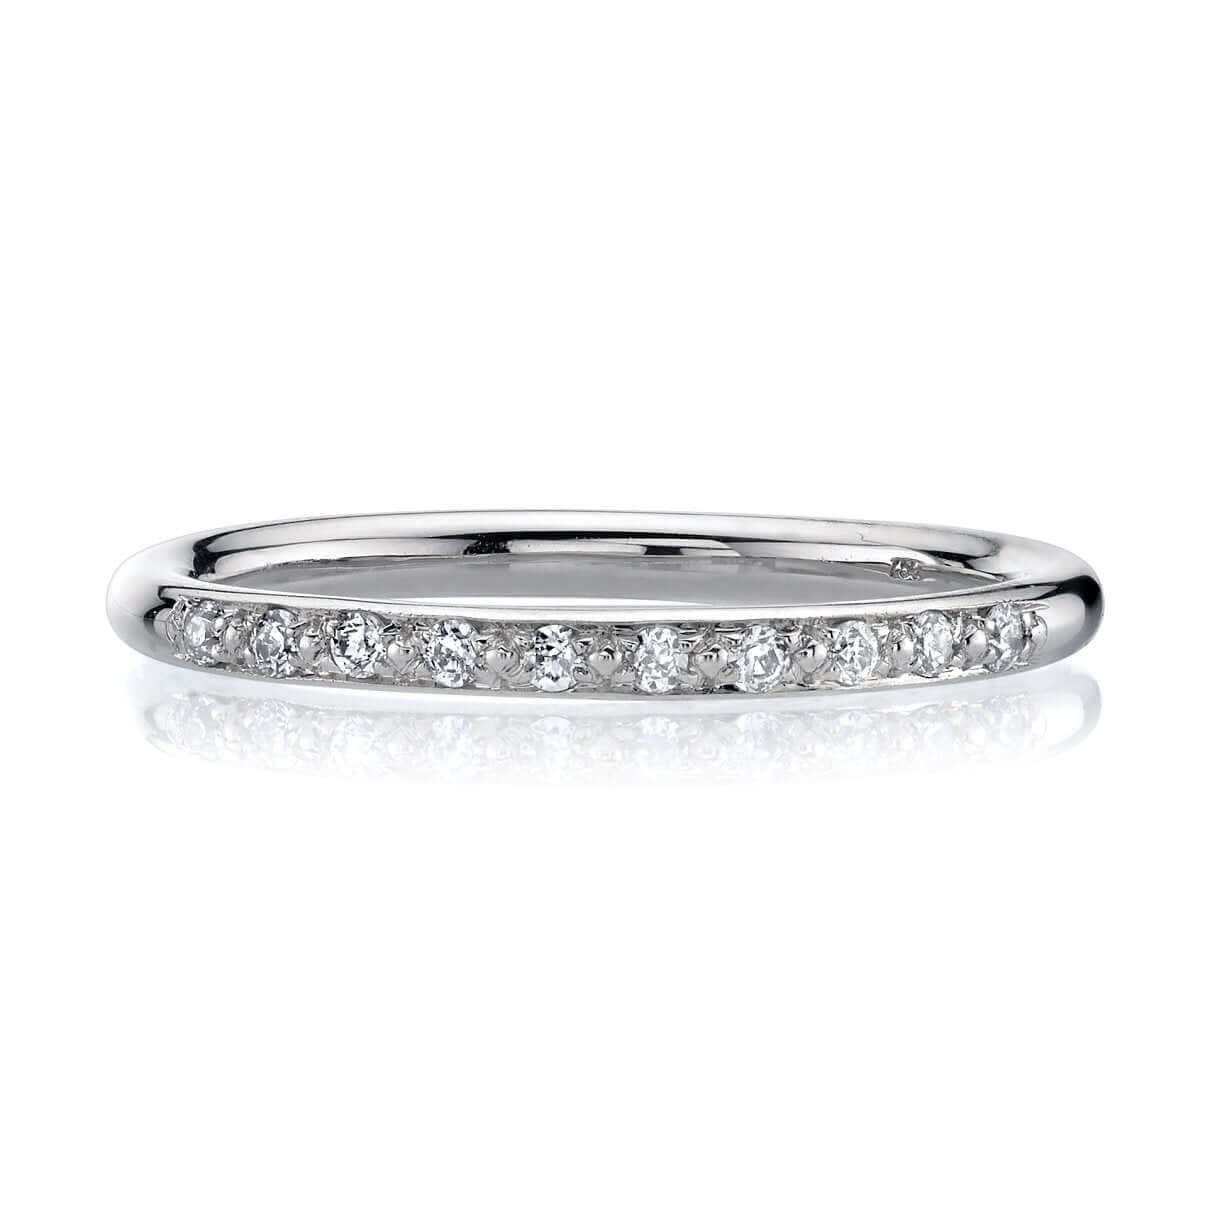 SINGLE STONE JAMIE BAND | Approximately 0.10ctw old European cut diamonds pave set in a handcrafted prong set half eternity band. Approximate band width 2mm. Please inquire for additional customization.